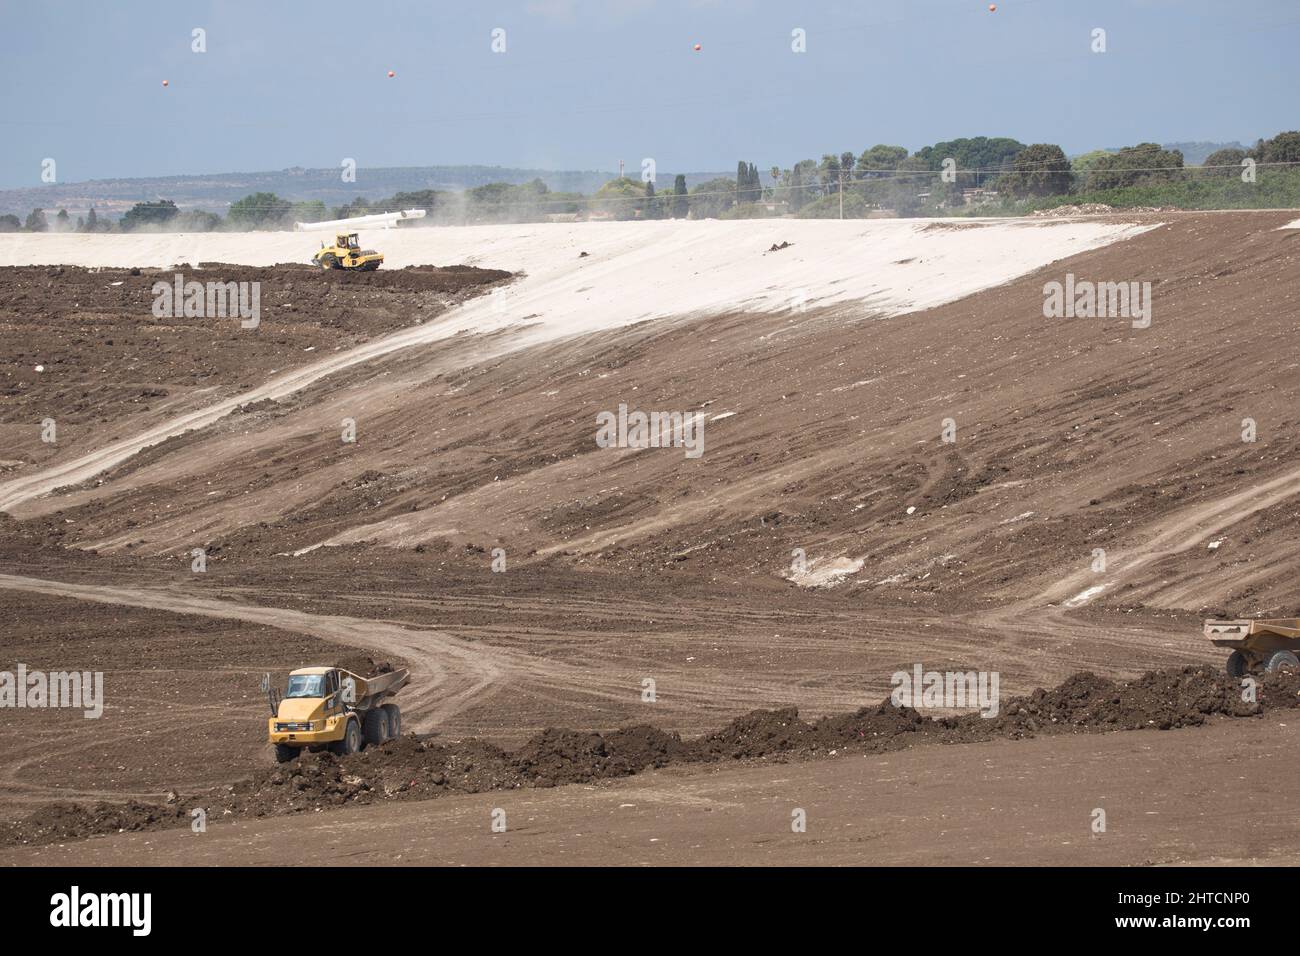 Heavy earth moving equipment clearing the ground for a large scale civil engineering project Stock Photo